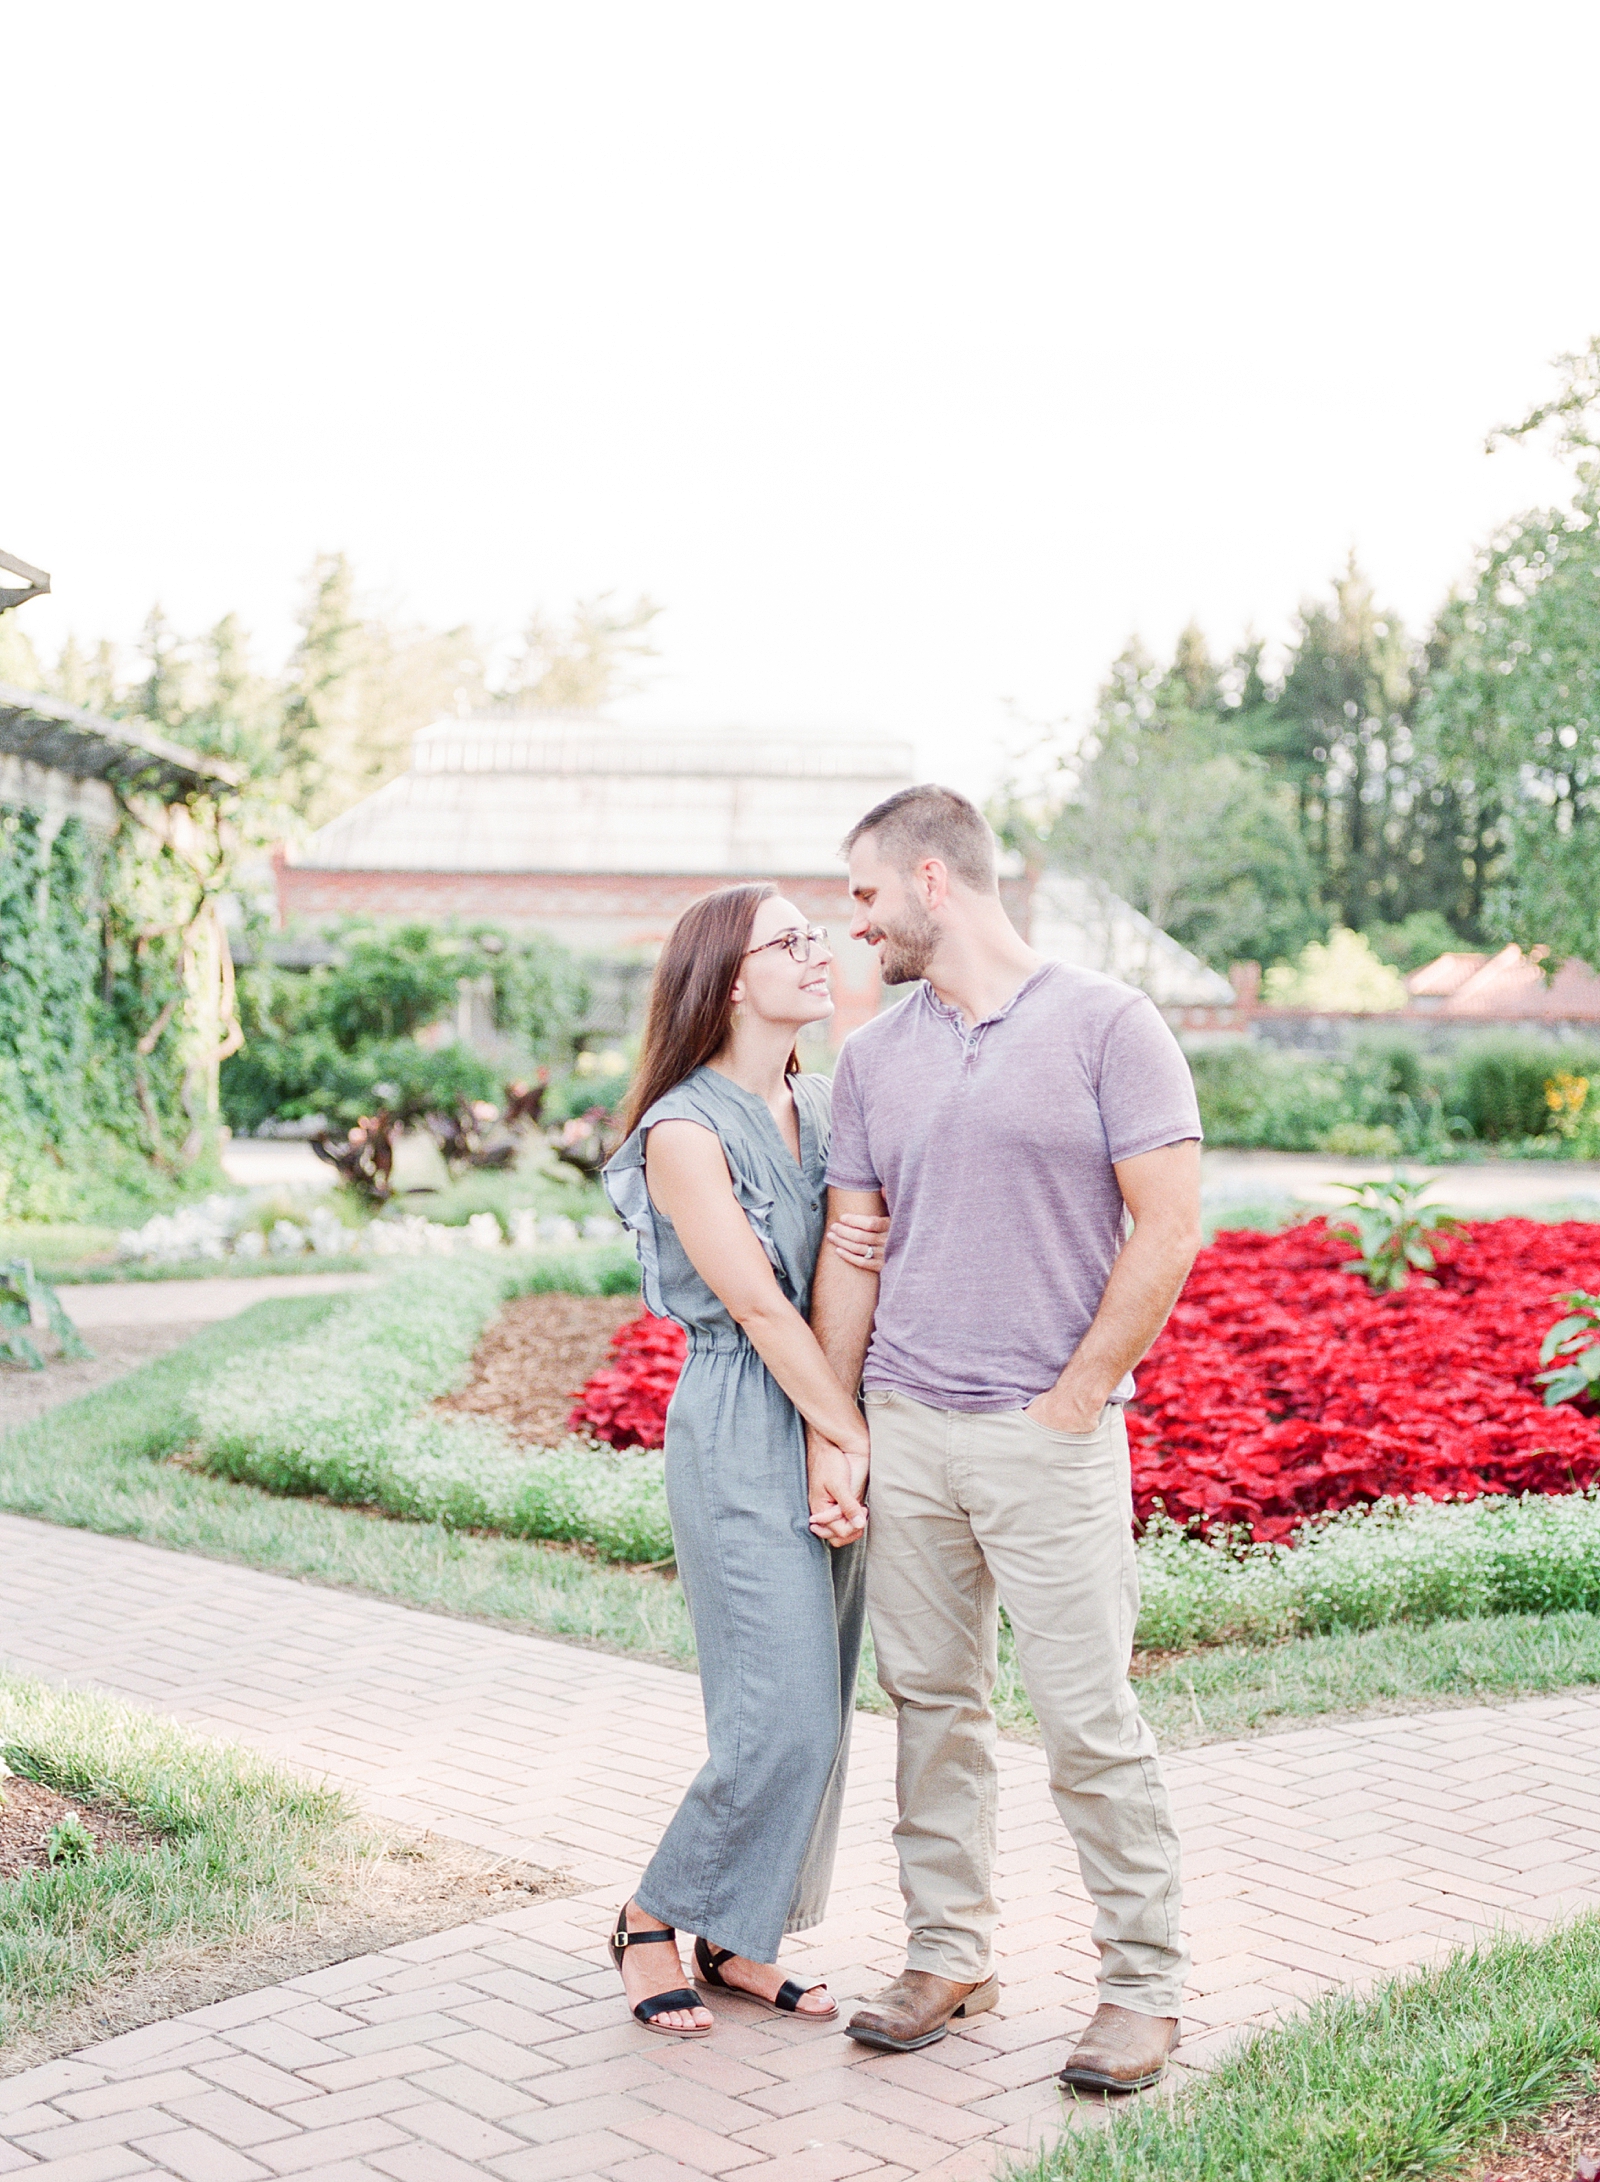 How To Have The Best Engagement Photos Couple At The Biltmore Gardens Holding Hands Smiling At Each Other Photo